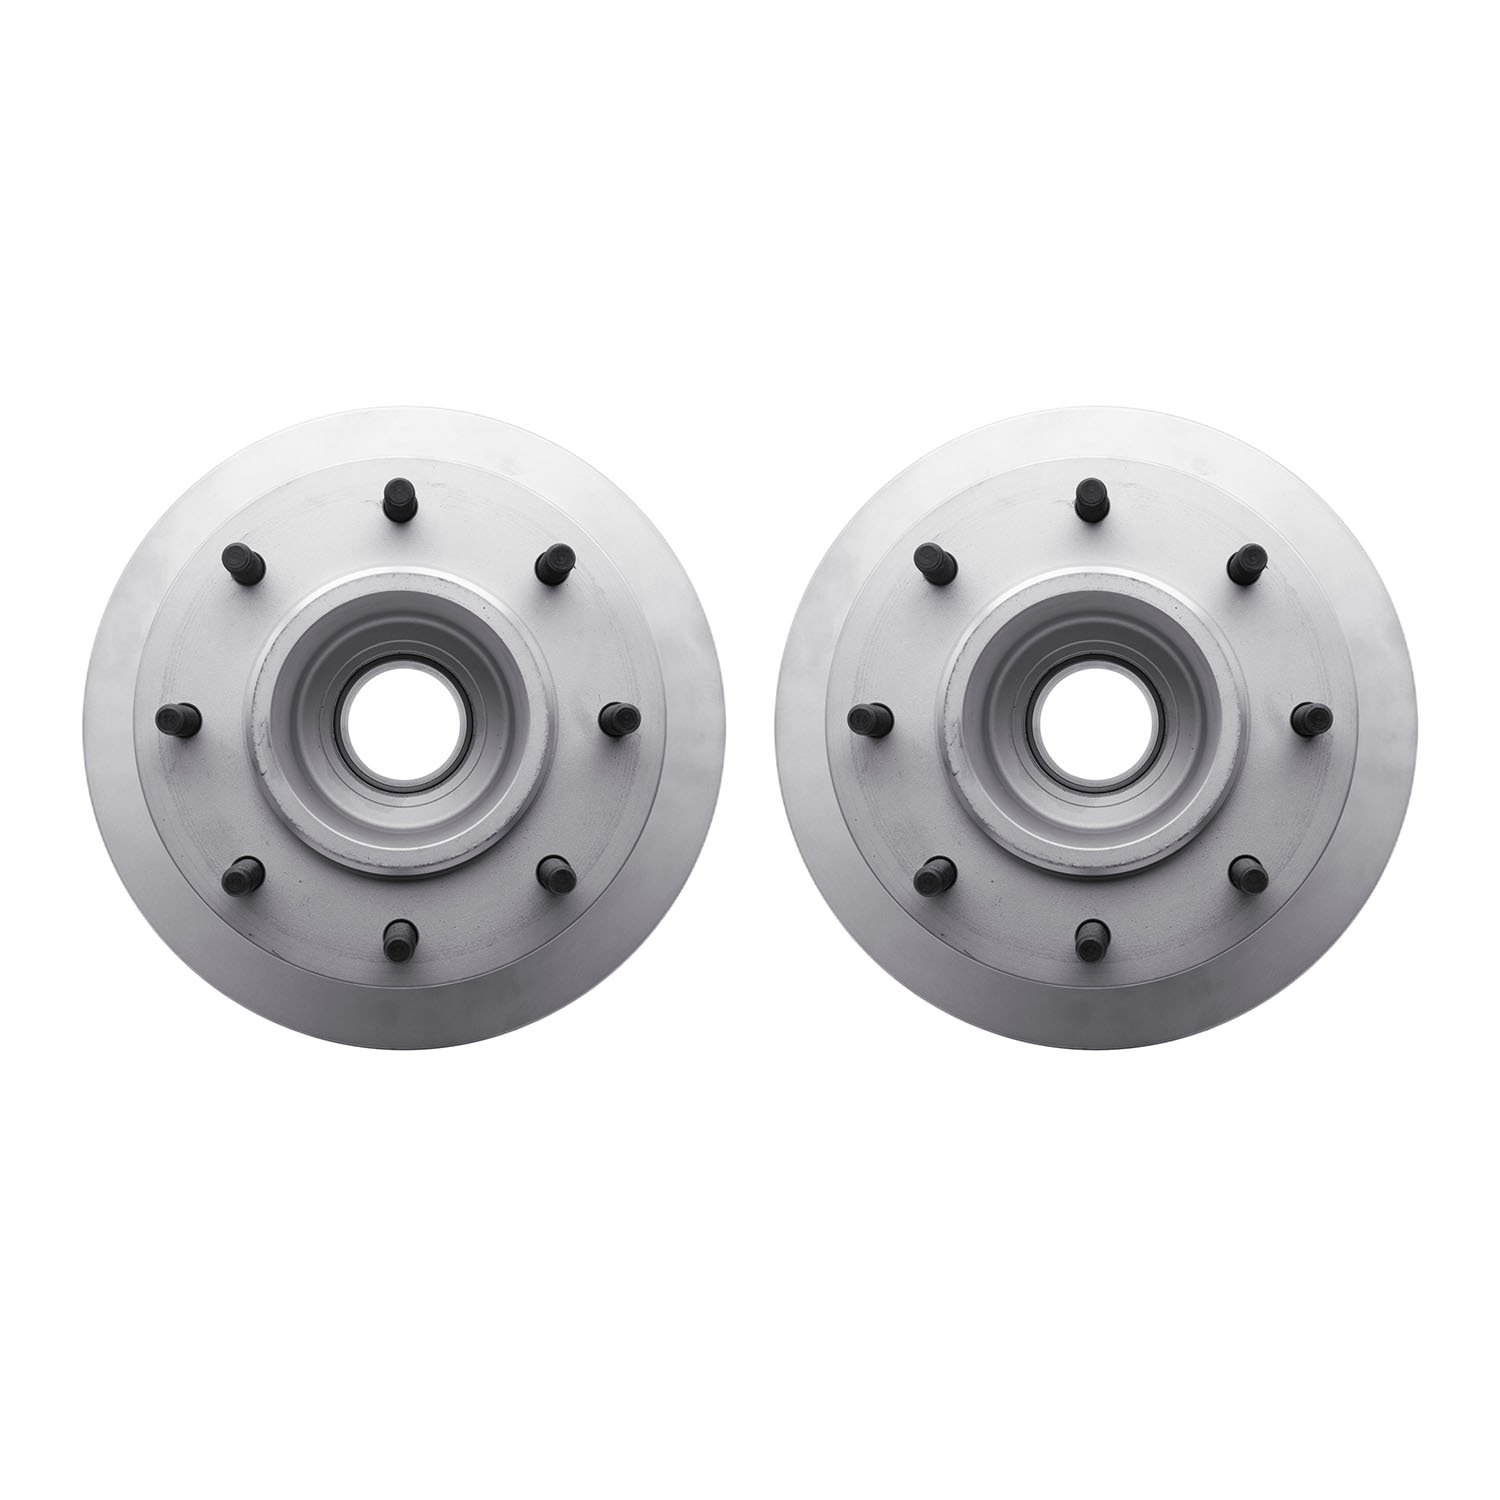 4002-54142 Geospec Brake Rotors, Fits Select Ford/Lincoln/Mercury/Mazda, Position: Front